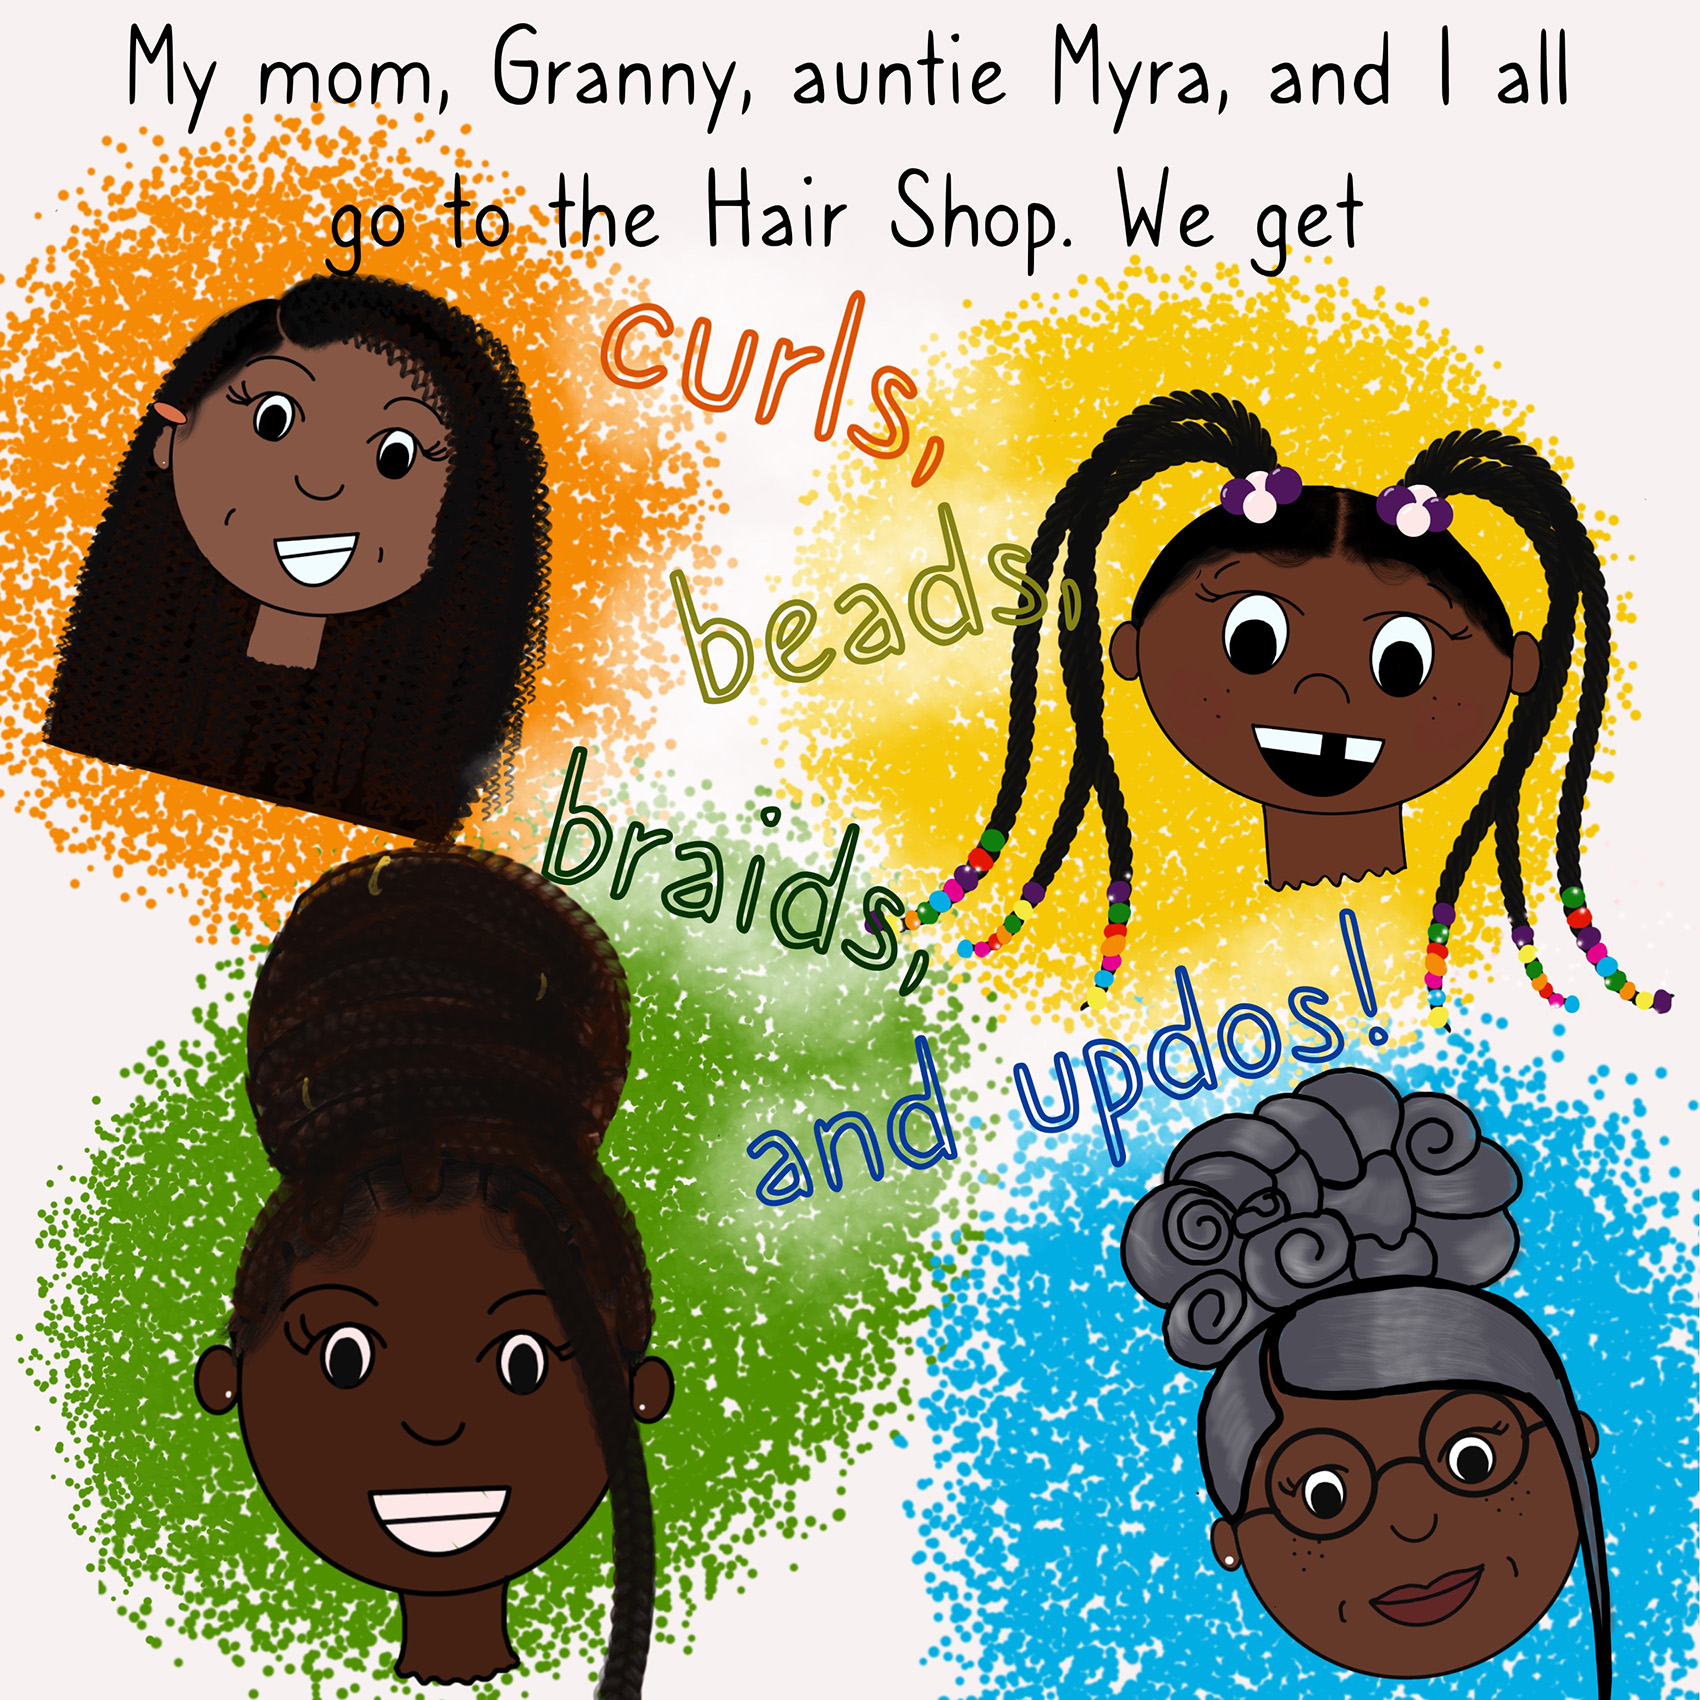 I Love My Family / Still of page with females family members after visiting the Hair Salon with colorful background from “I Love My Family,” a book highlighting various family structures using Procreate. 